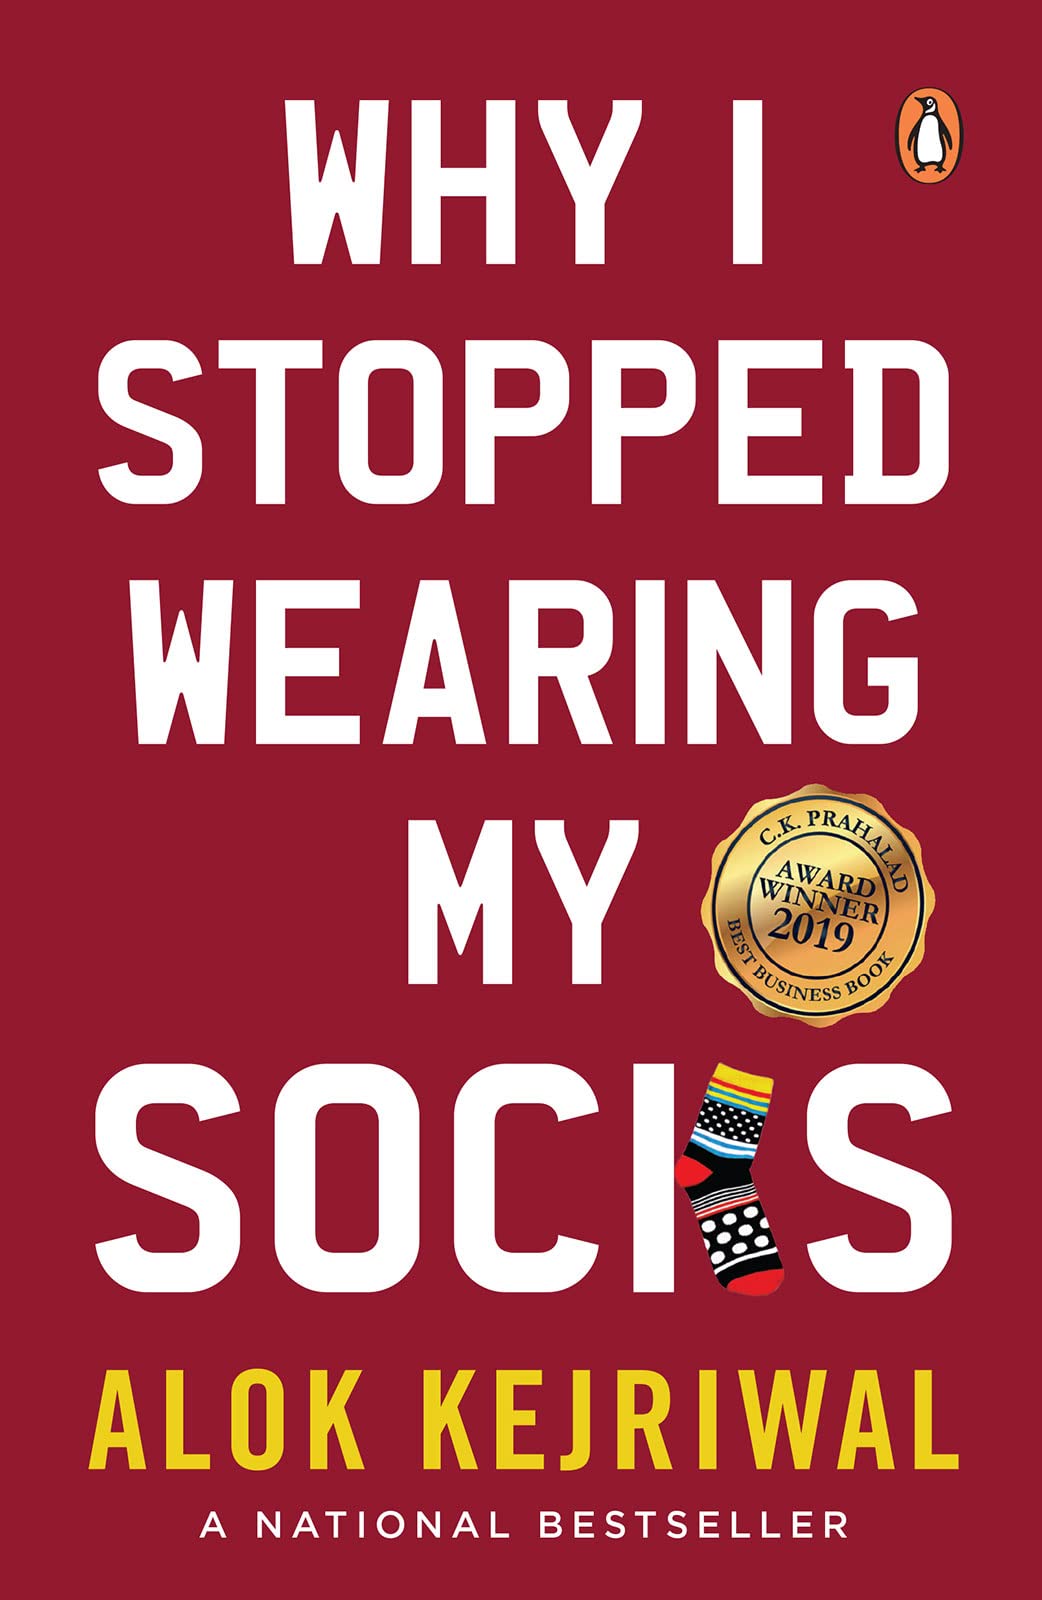 Why I stopped wearing my Socks